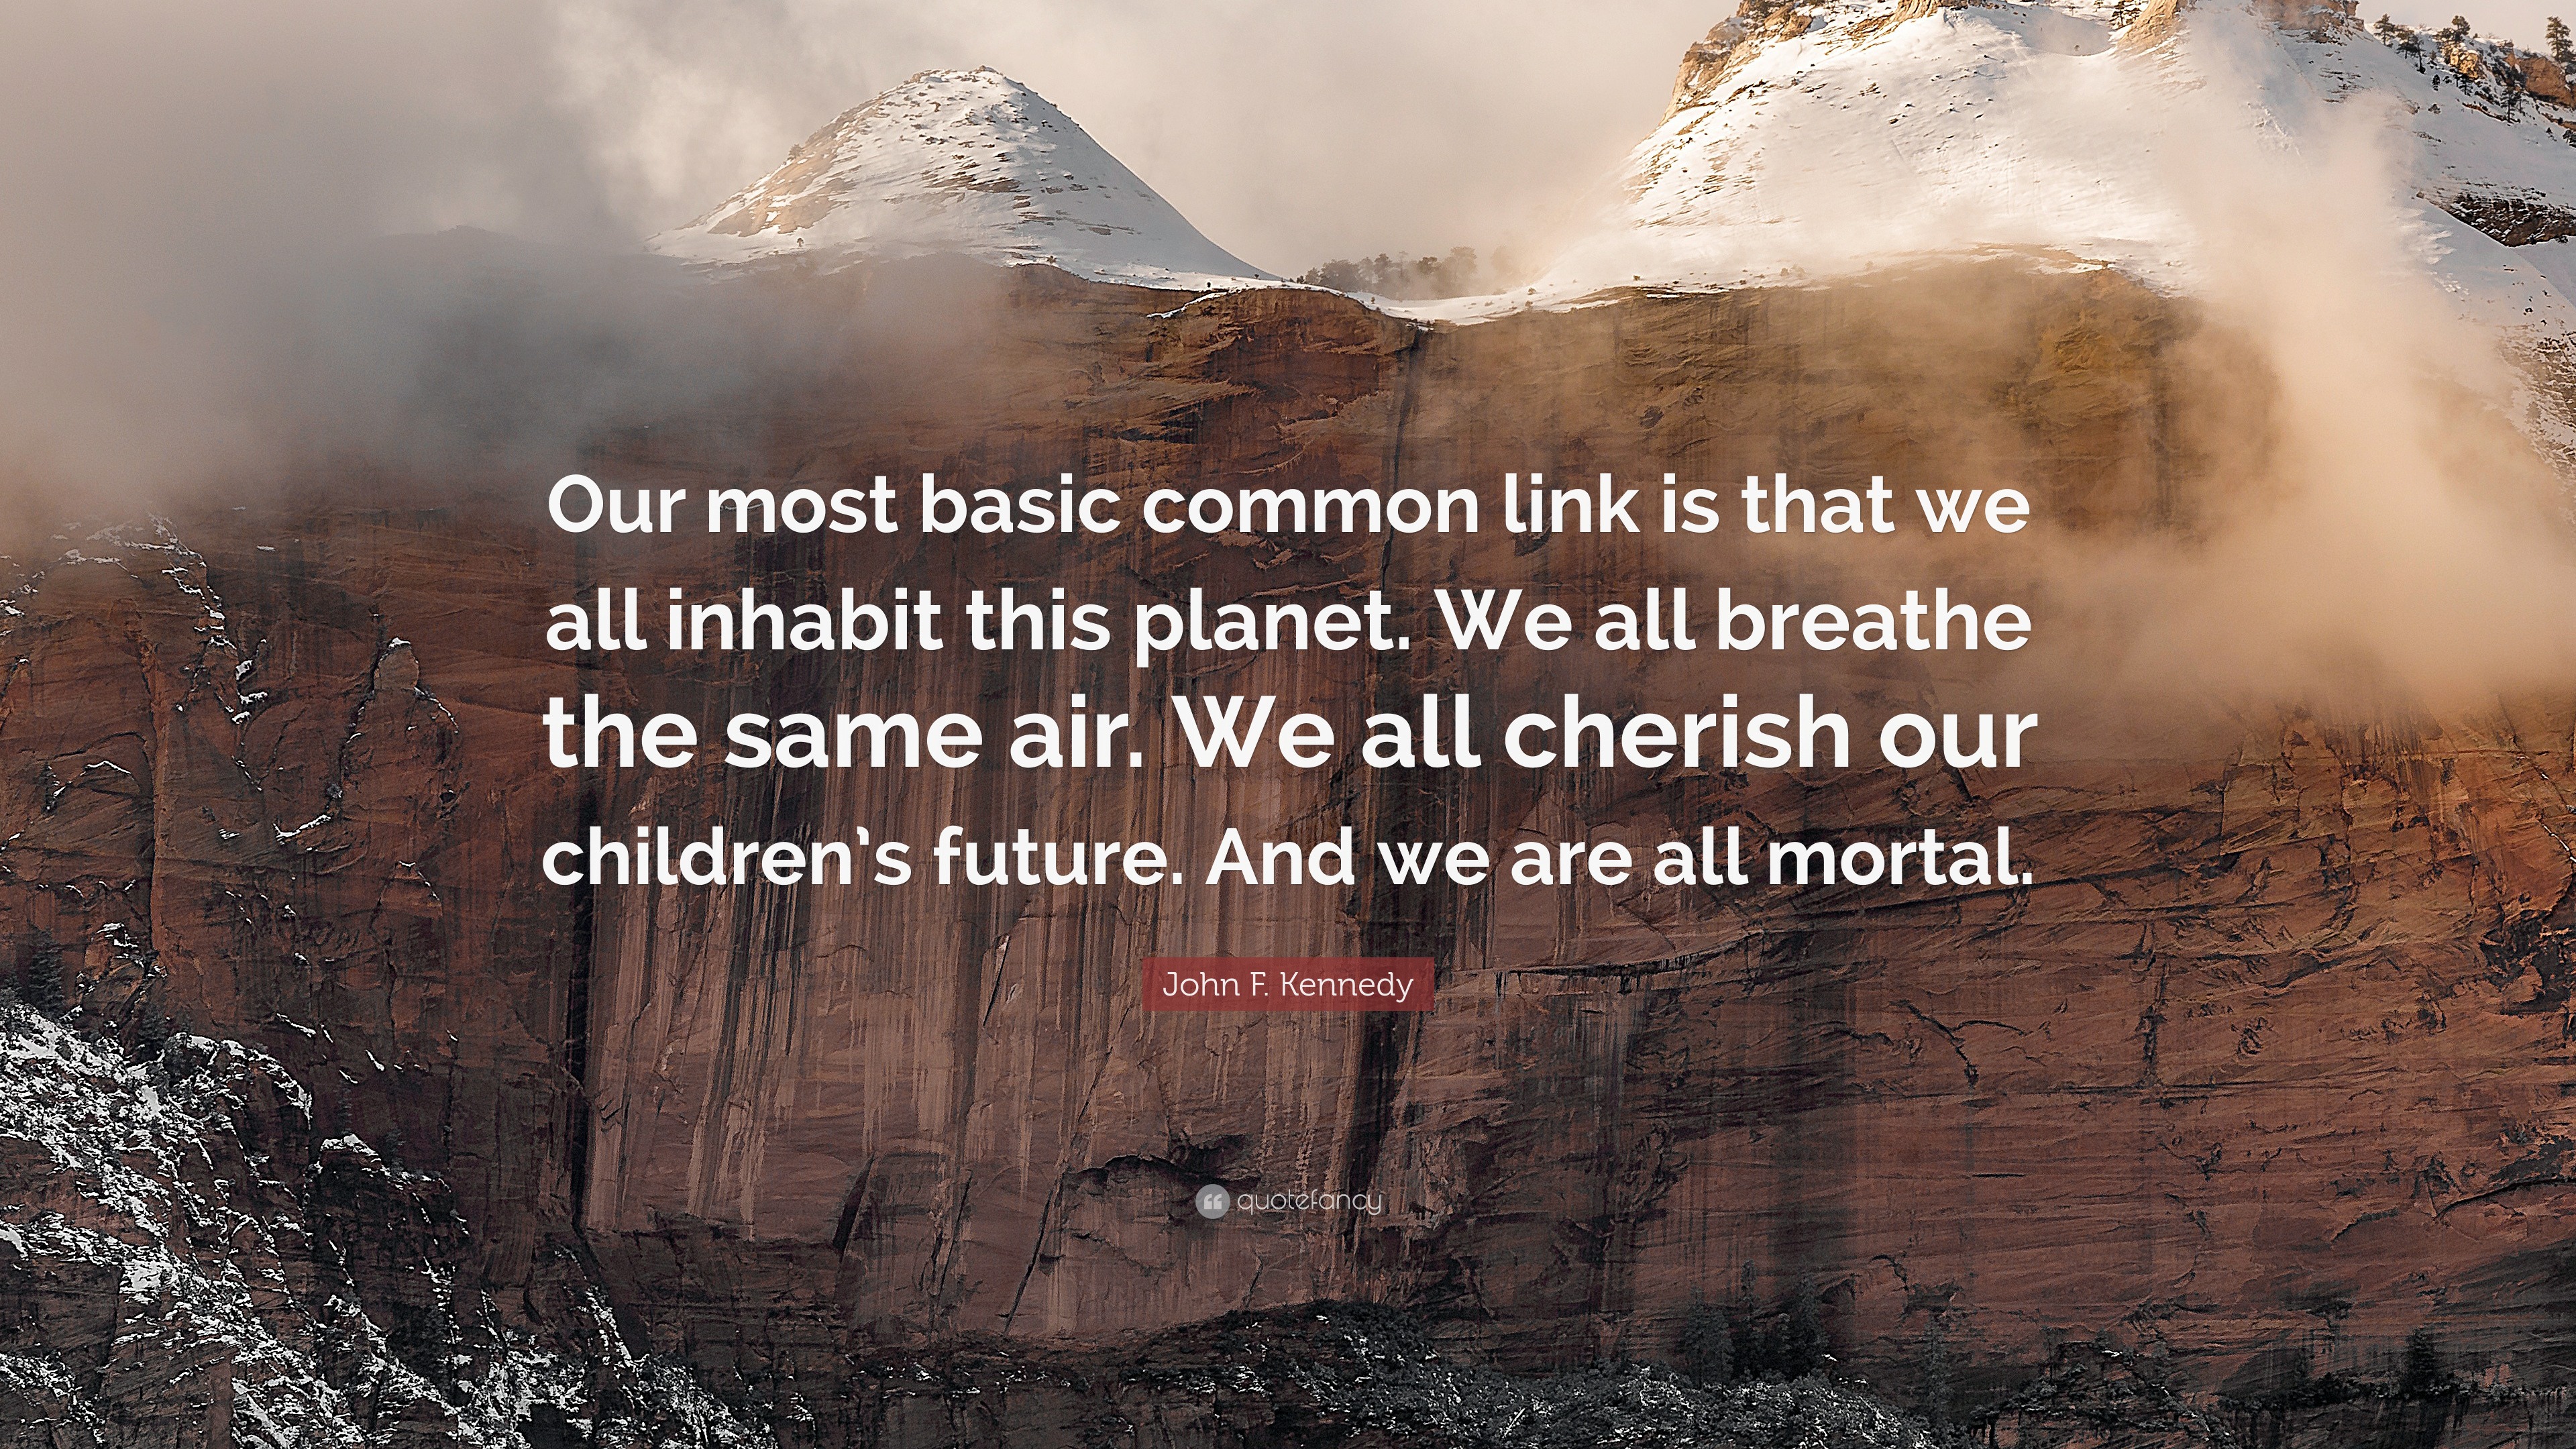 John F. Kennedy Quote Our most basic common link is that 